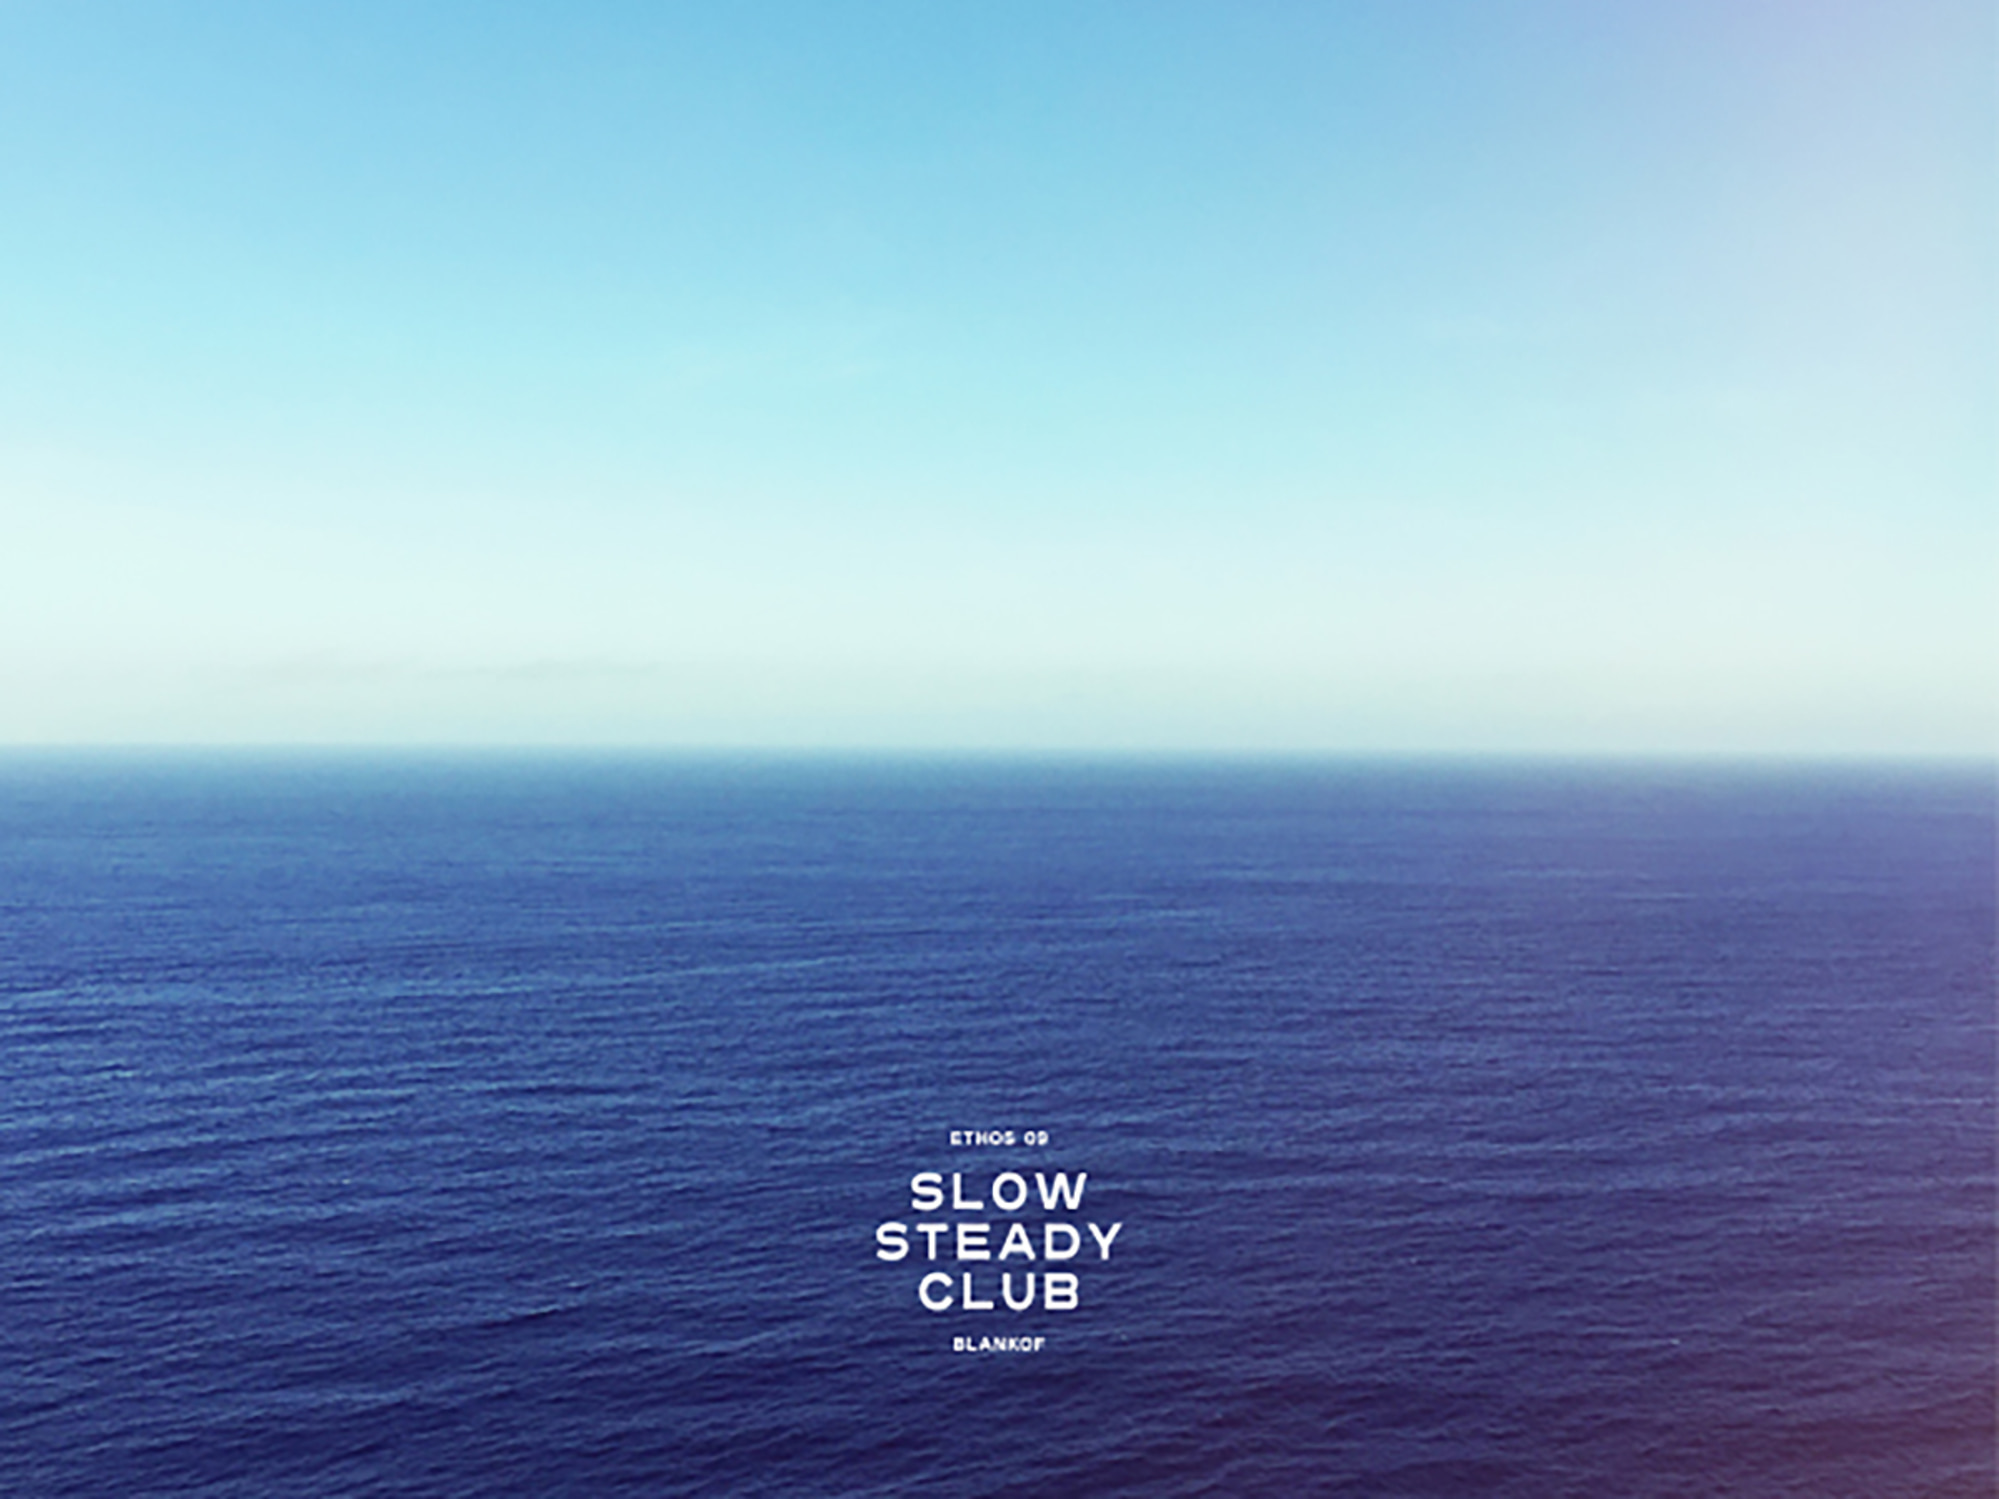 SLOW STEADY CLUB : 2016 SPRING/SUMMER SELECTION